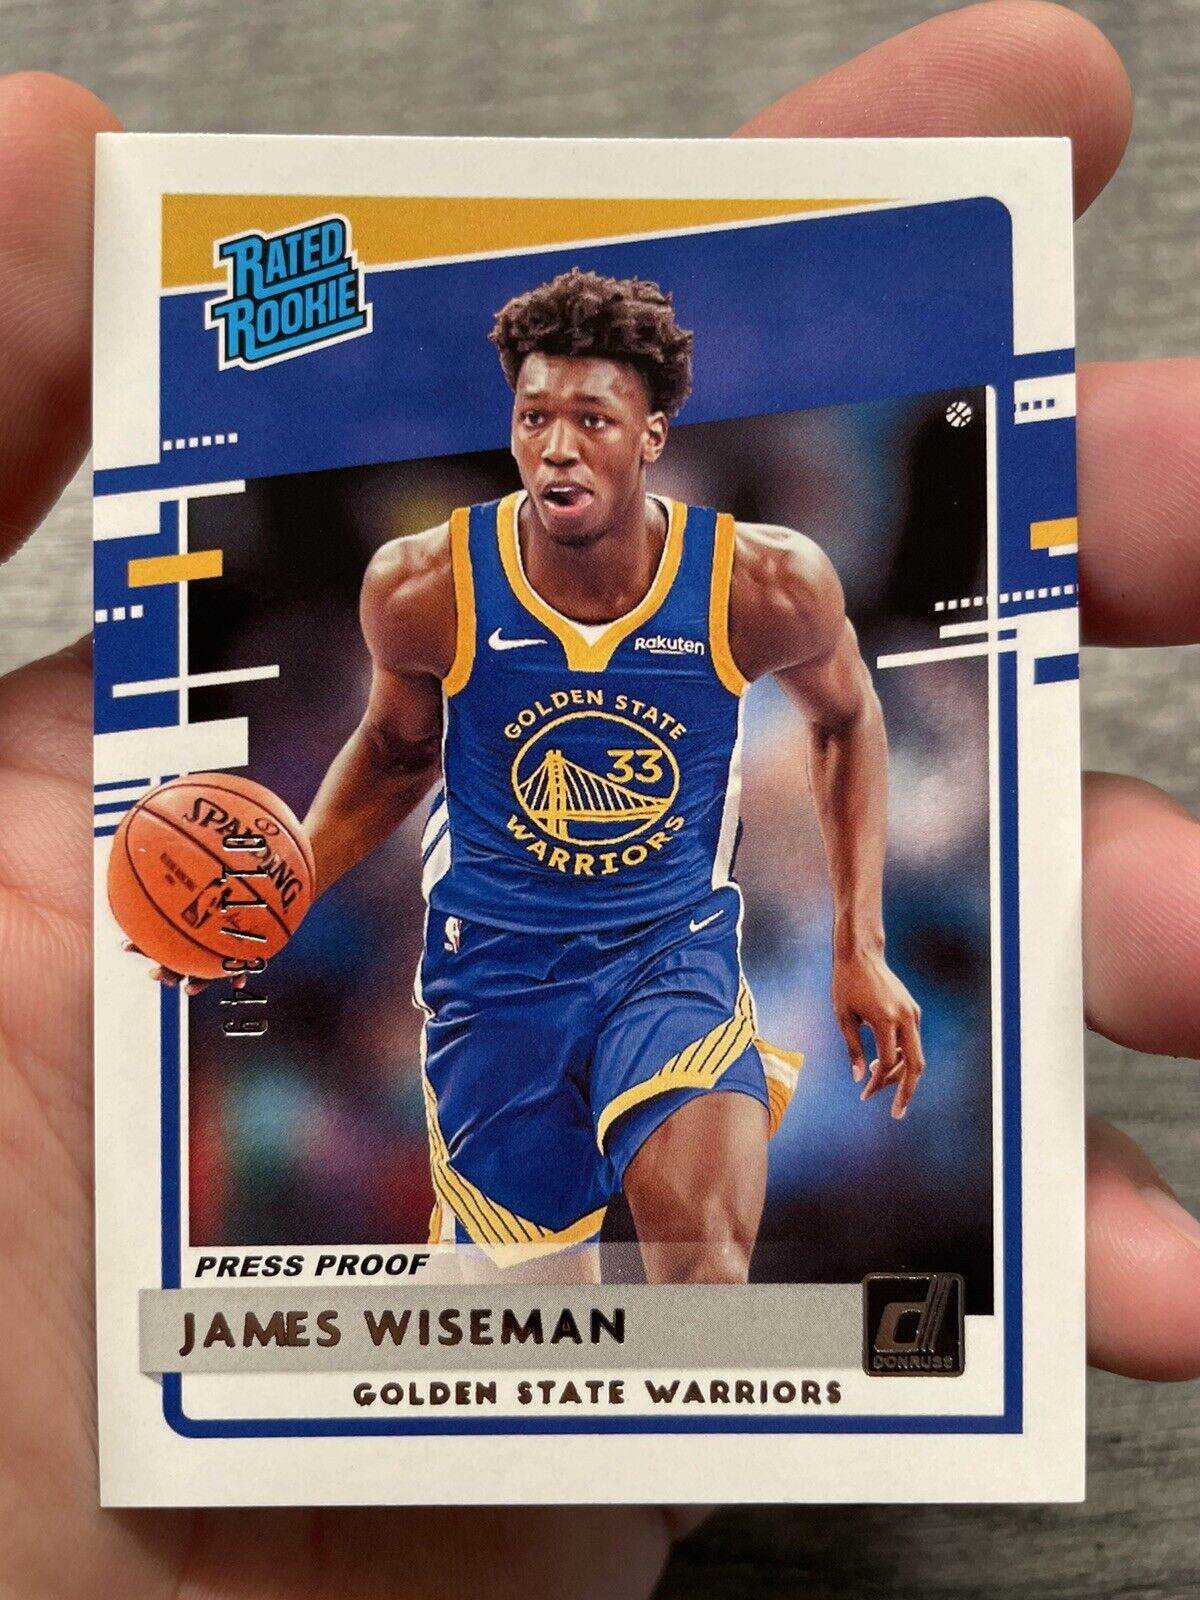 2020-21 Donruss James Wiseman Rated Rookie Silver Press Proof /349 (PACK FRESH)